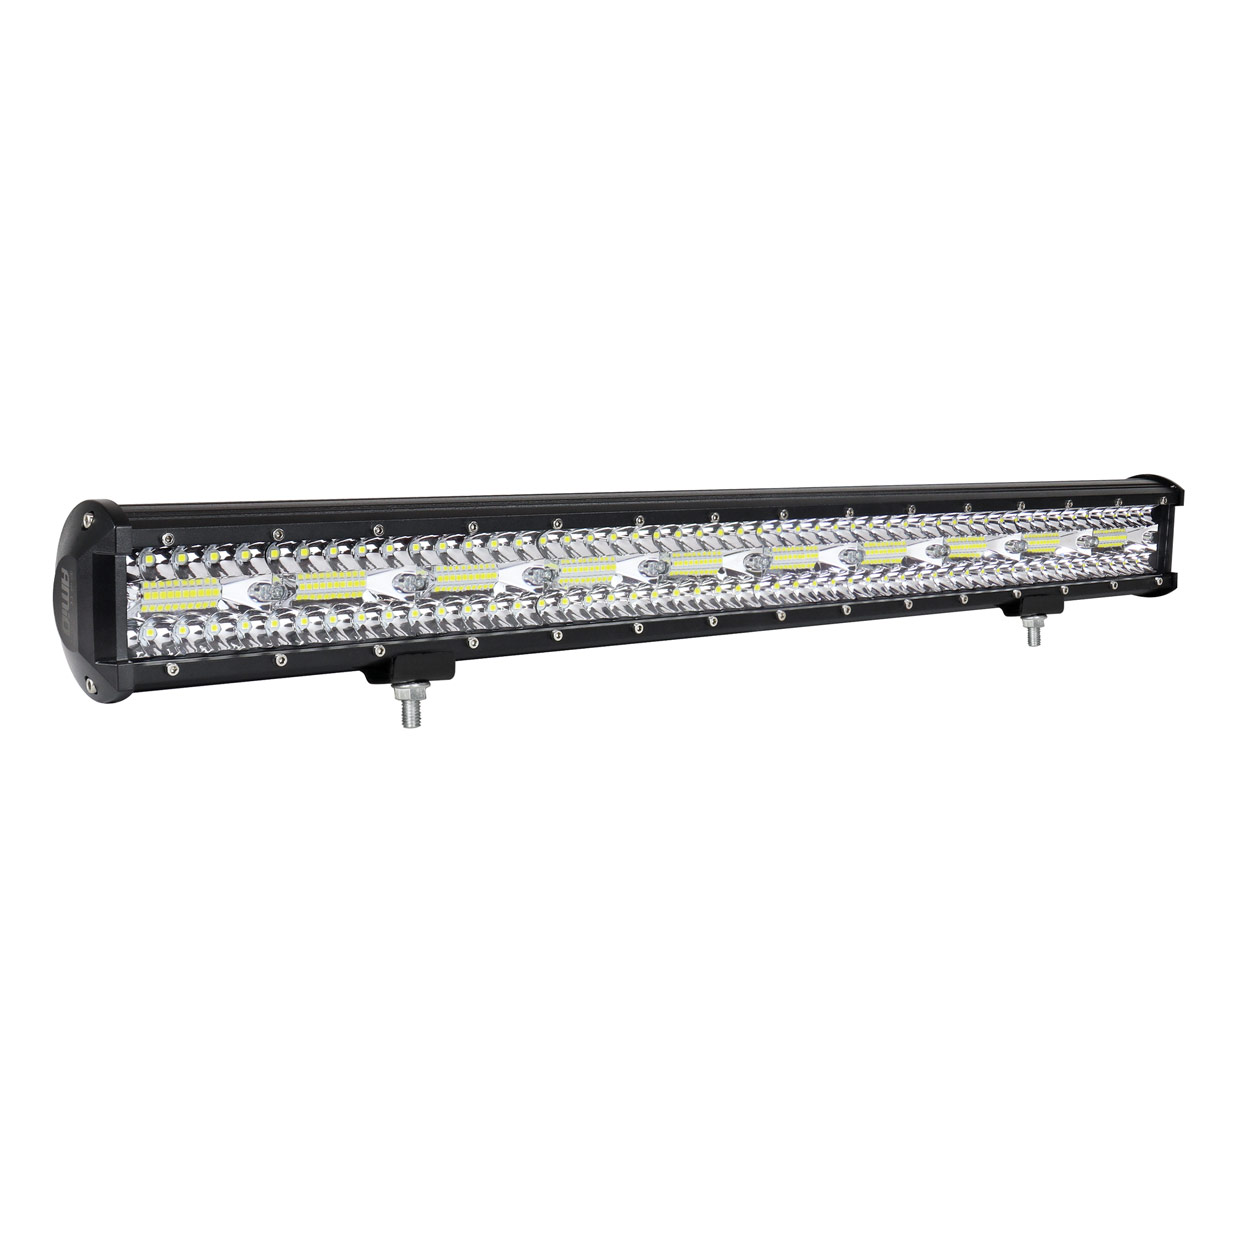 02544/AM ΠΡΟΒΟΛΕΑΣ ΕΡΓΑΣΙΑΣ WORKING LAMP 200xSMD LED 9>36V 60.000lm 6.000>6.500K 720x74x63mm AWL30 AMIO